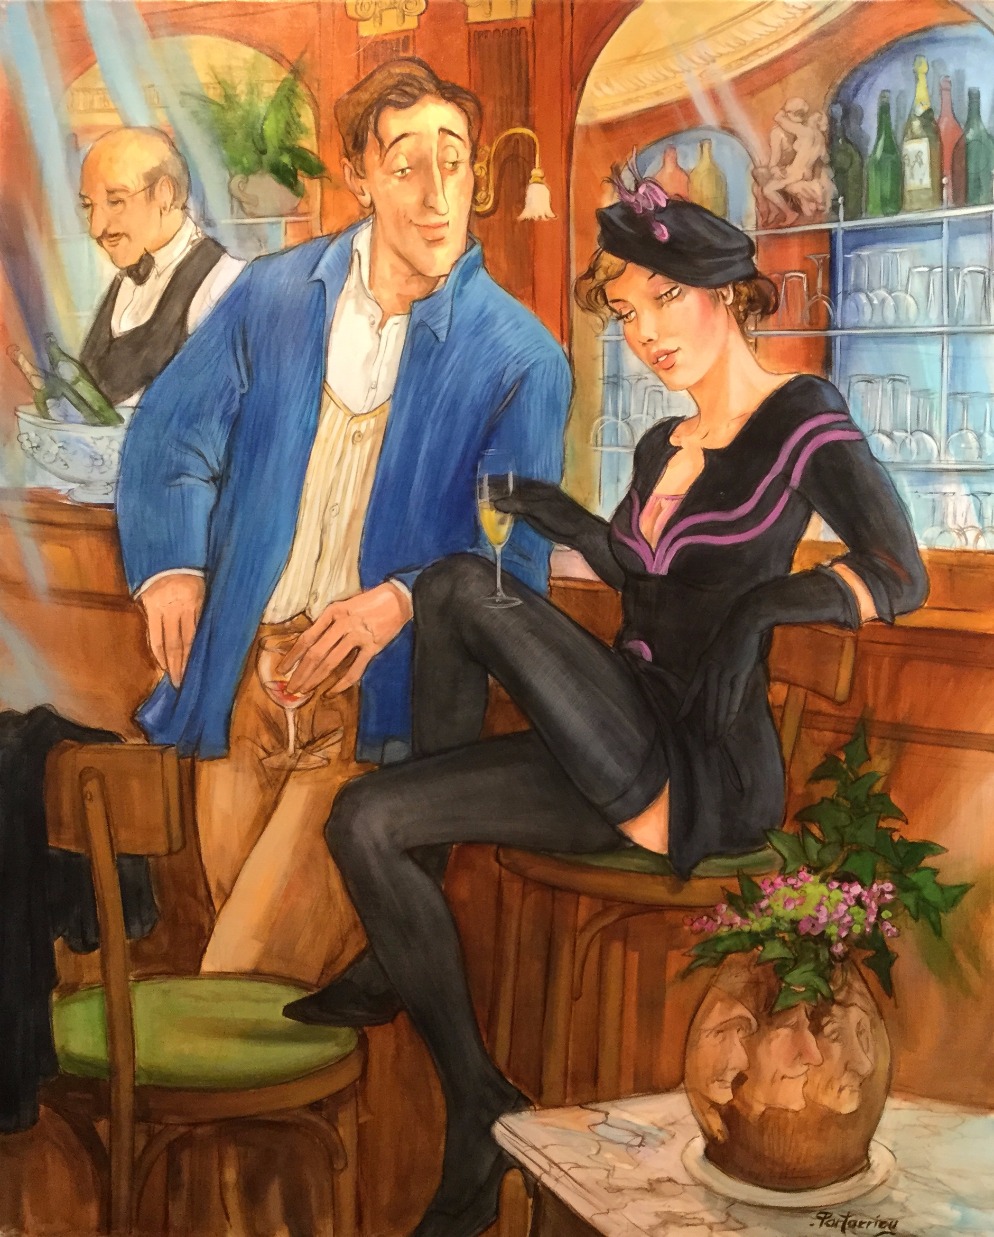 Rencontre au Bar (Meeting at the Bar) by Partarrieu, Figurative | French